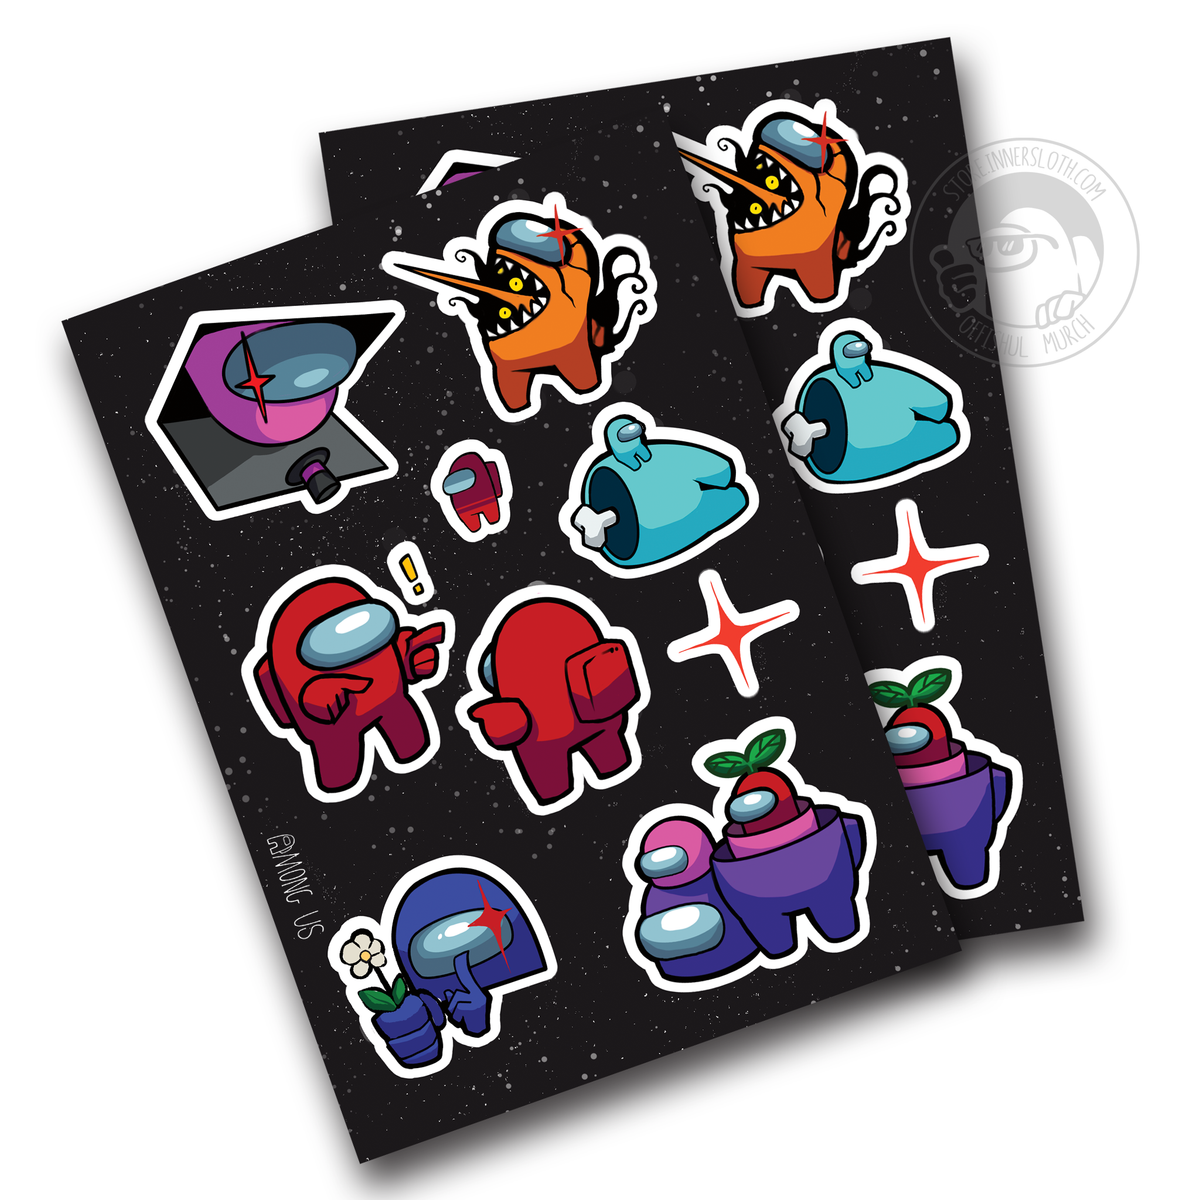 Among Us: Impostor Syndrome Sticker Sheet by Lokii